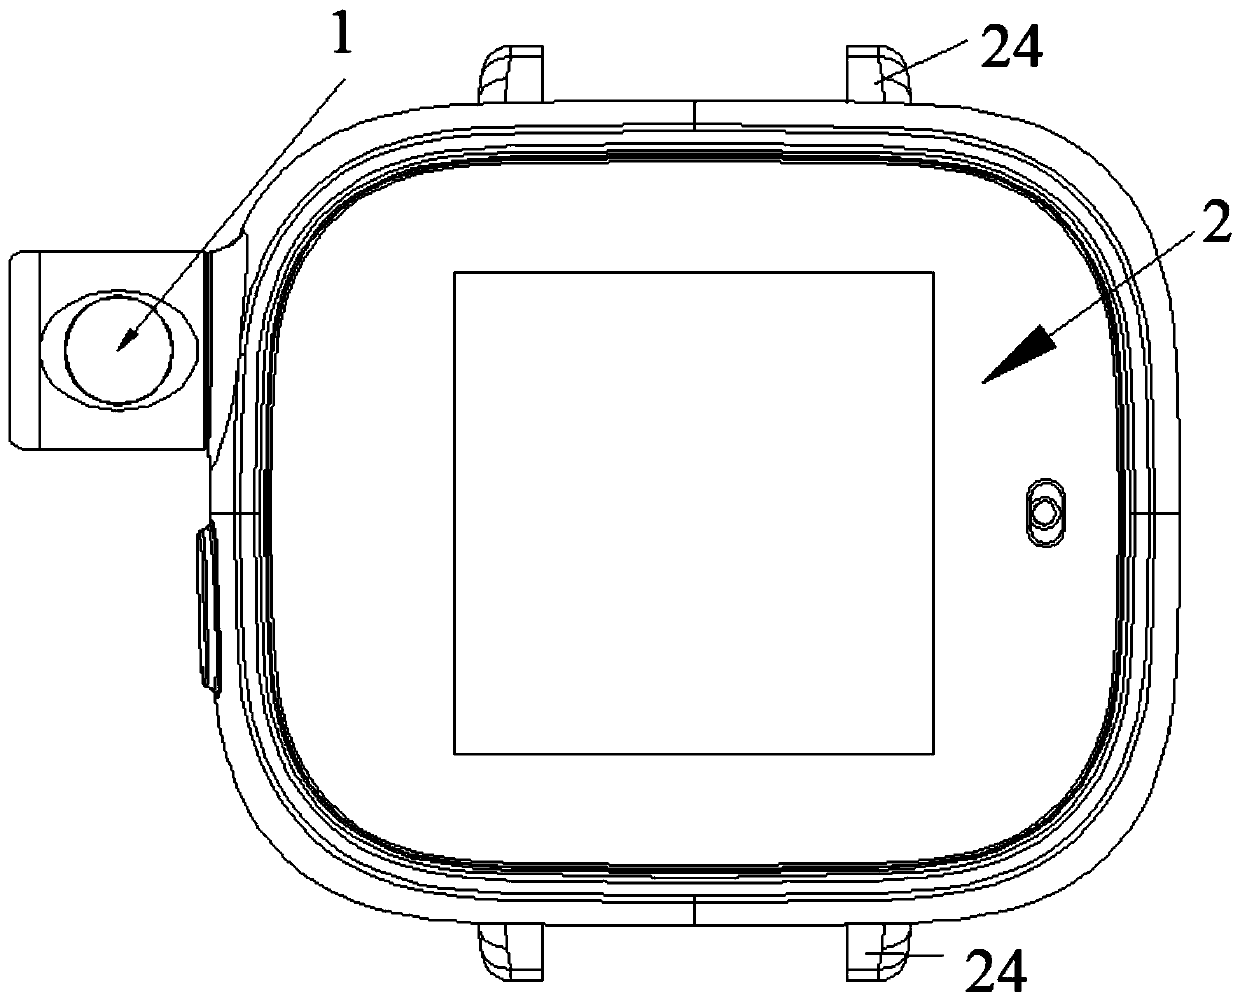 Camera fixing structure and wrist equipment